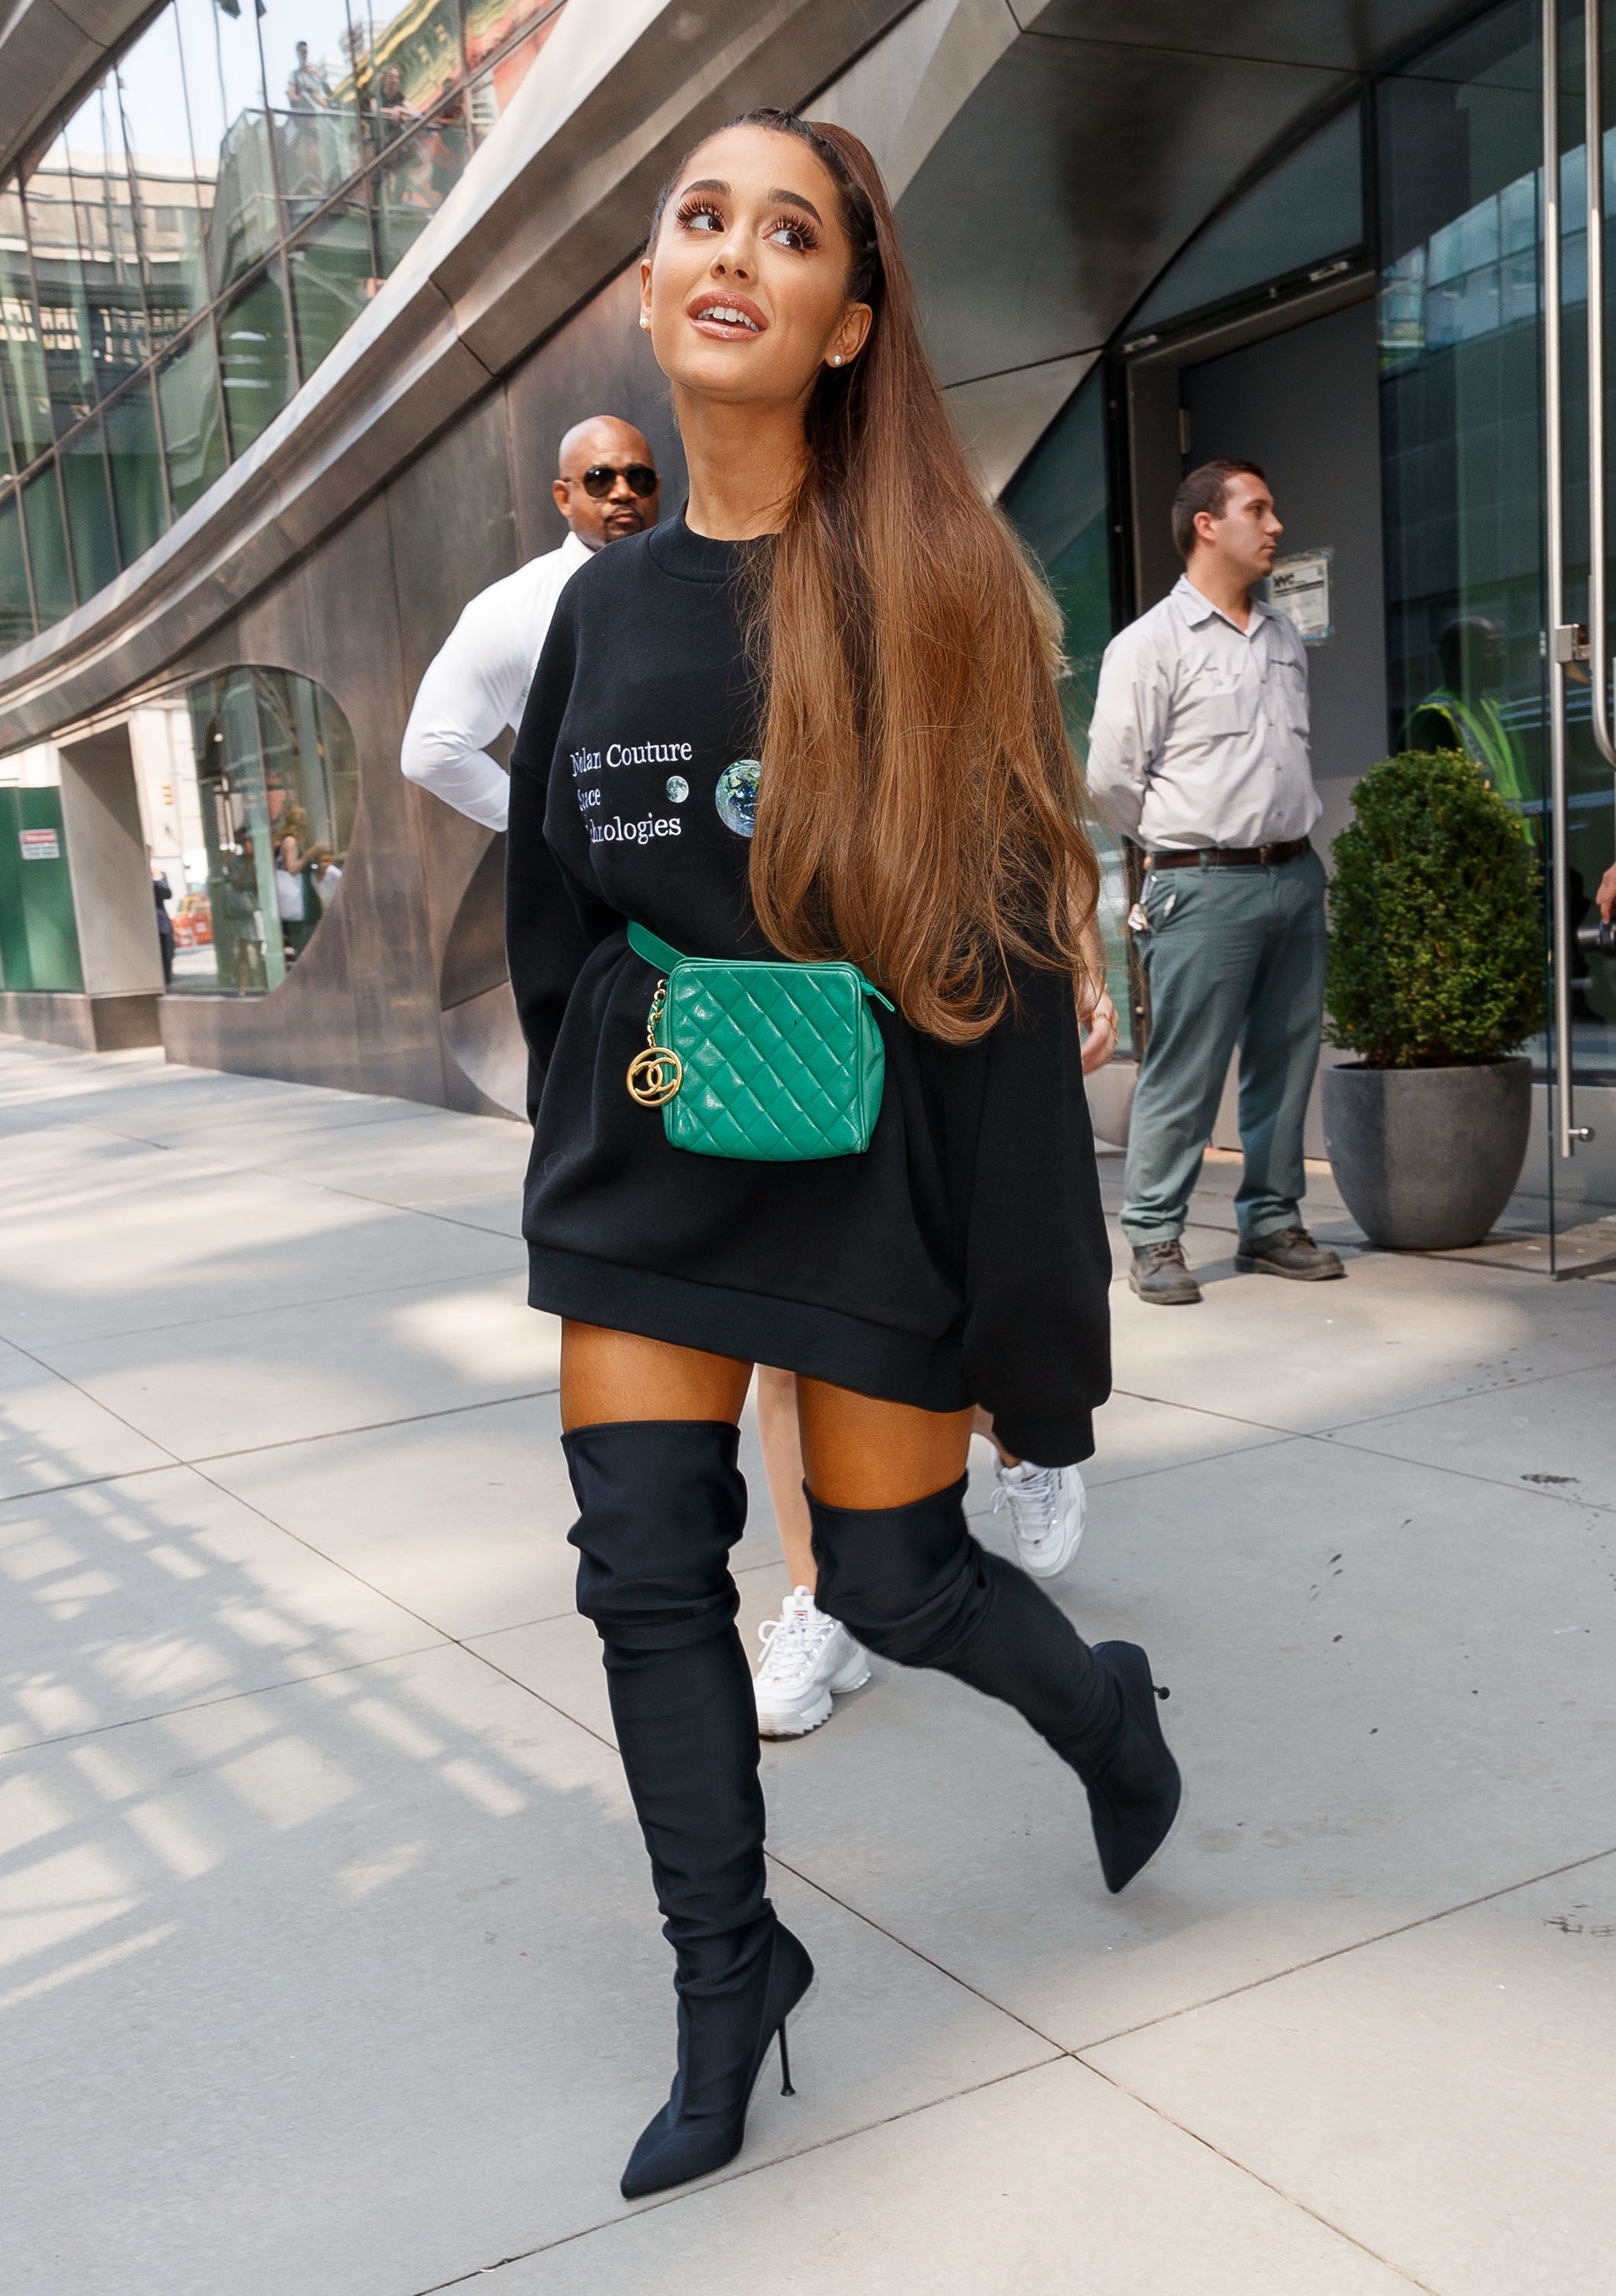 Ariana Grande's ponytail: 3 ways to wear her signature look